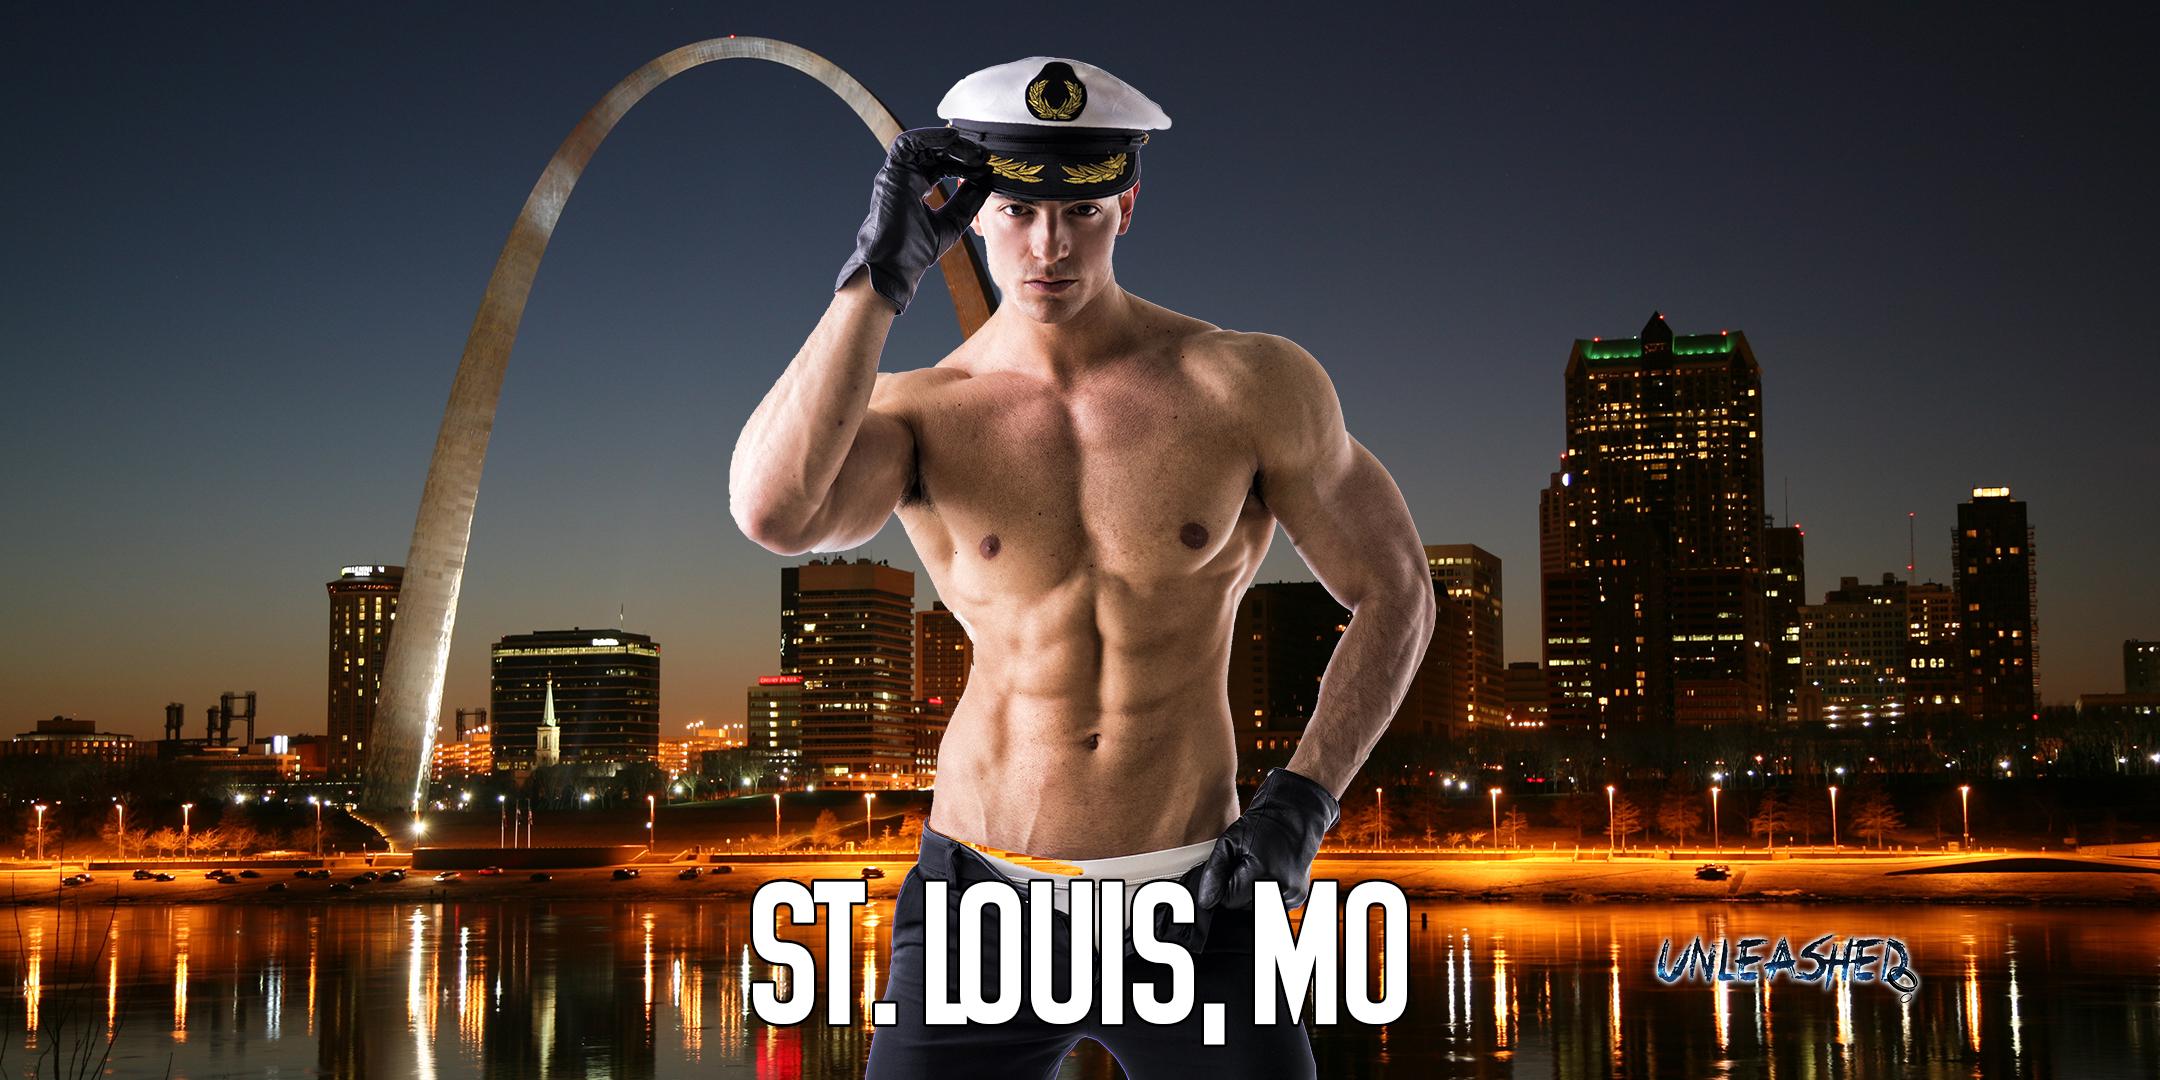 Male Strippers UNLEASHED Male Revue St. Louis, MO 8-10 PM